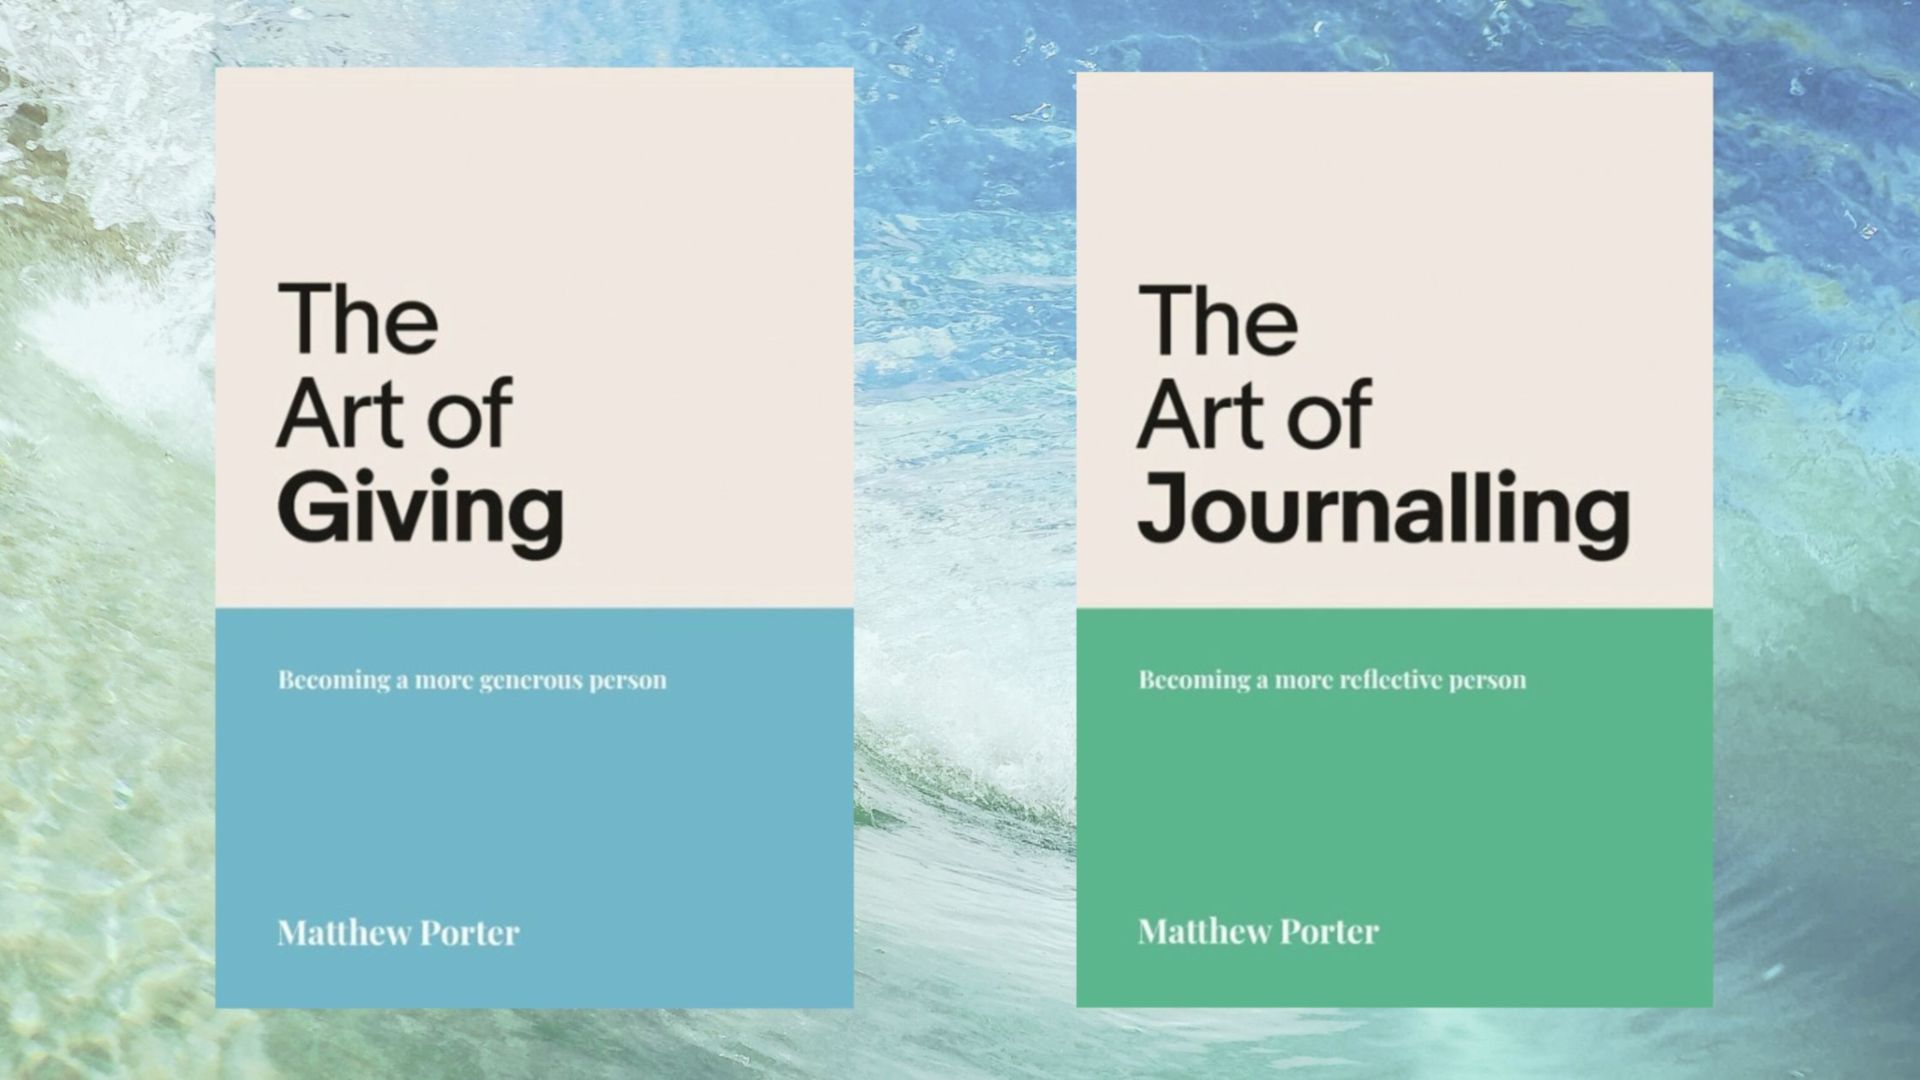 A review of the first 2 books in the new 'The Art of' series by Matthew Porter